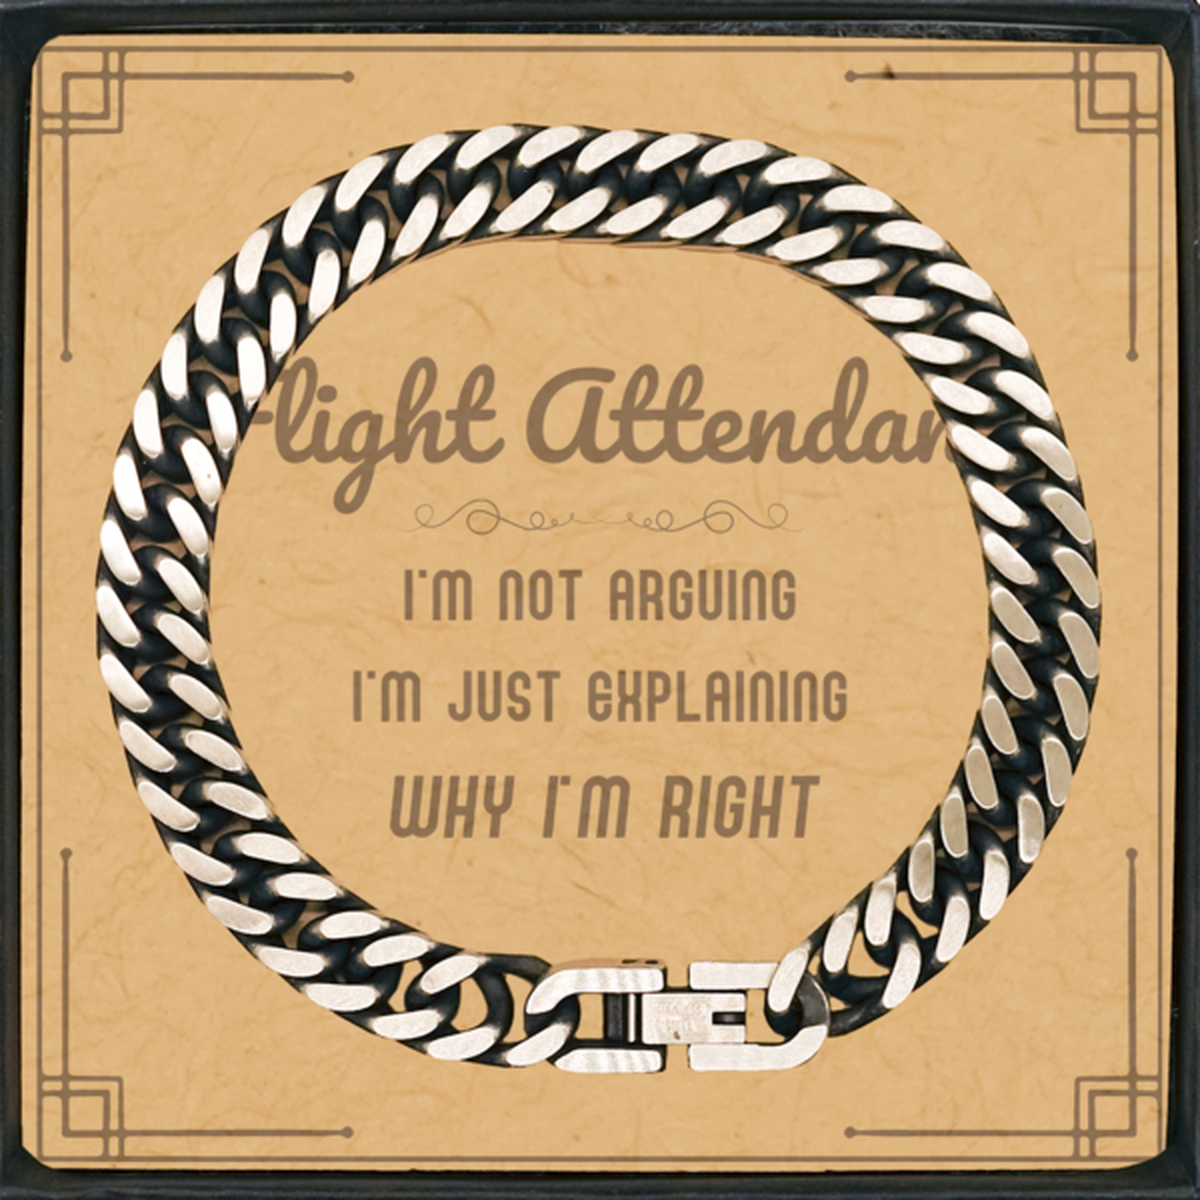 Flight Attendant I'm not Arguing. I'm Just Explaining Why I'm RIGHT Cuban Link Chain Bracelet, Funny Saying Quote Flight Attendant Gifts For Flight Attendant Message Card Graduation Birthday Christmas Gifts for Men Women Coworker